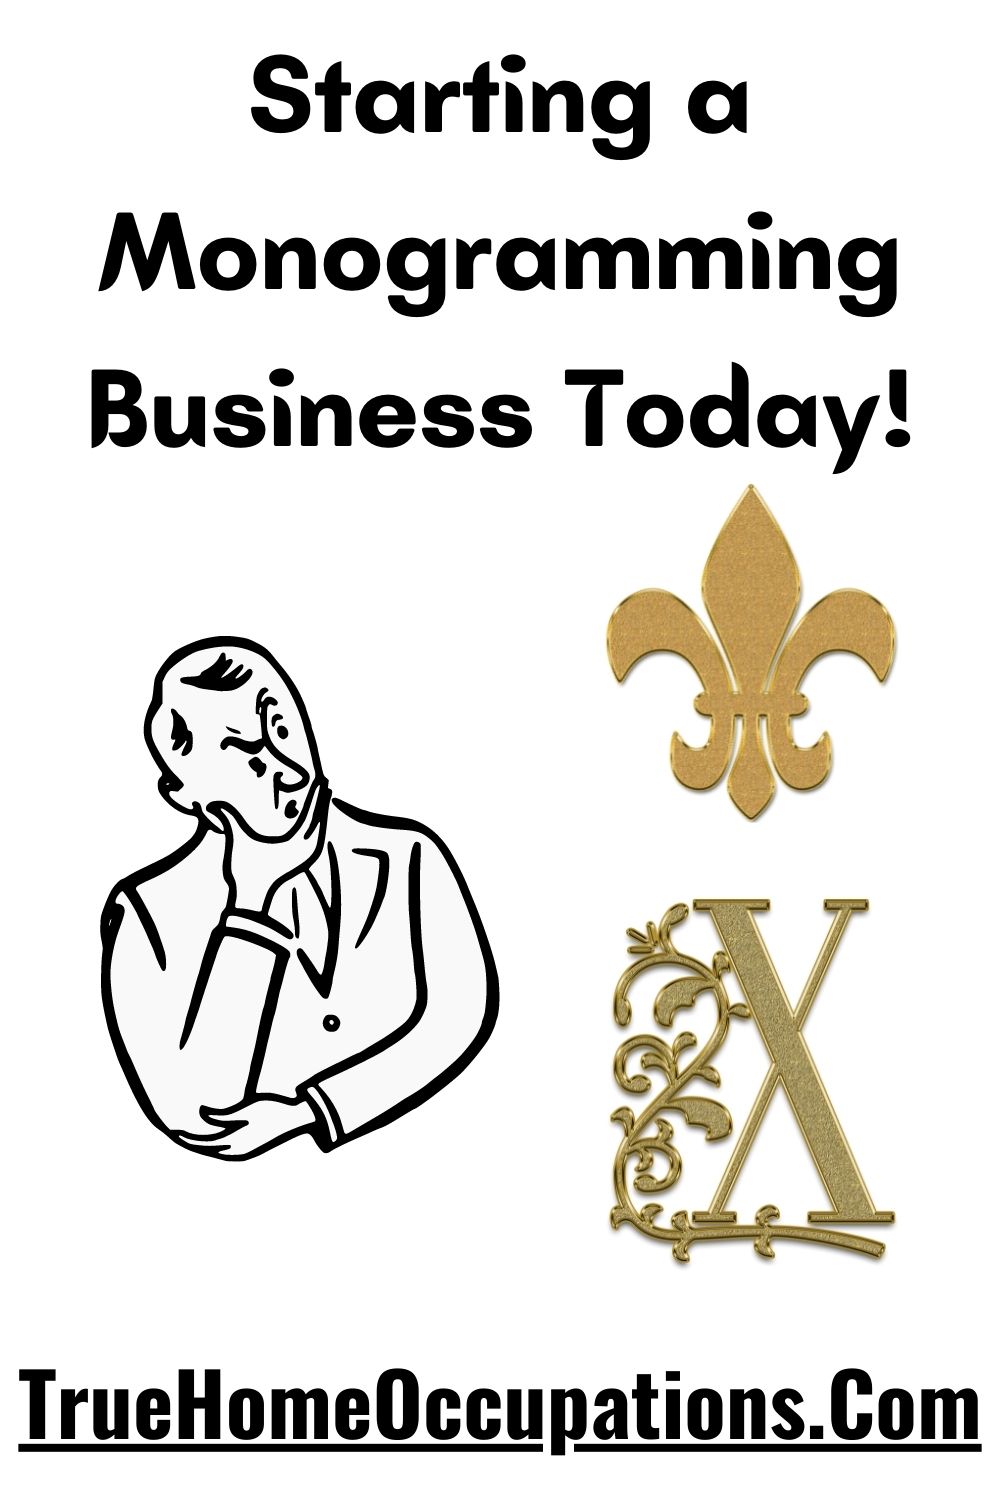 Starting a Monogramming Business Today - TrueHomeOccupations.Com